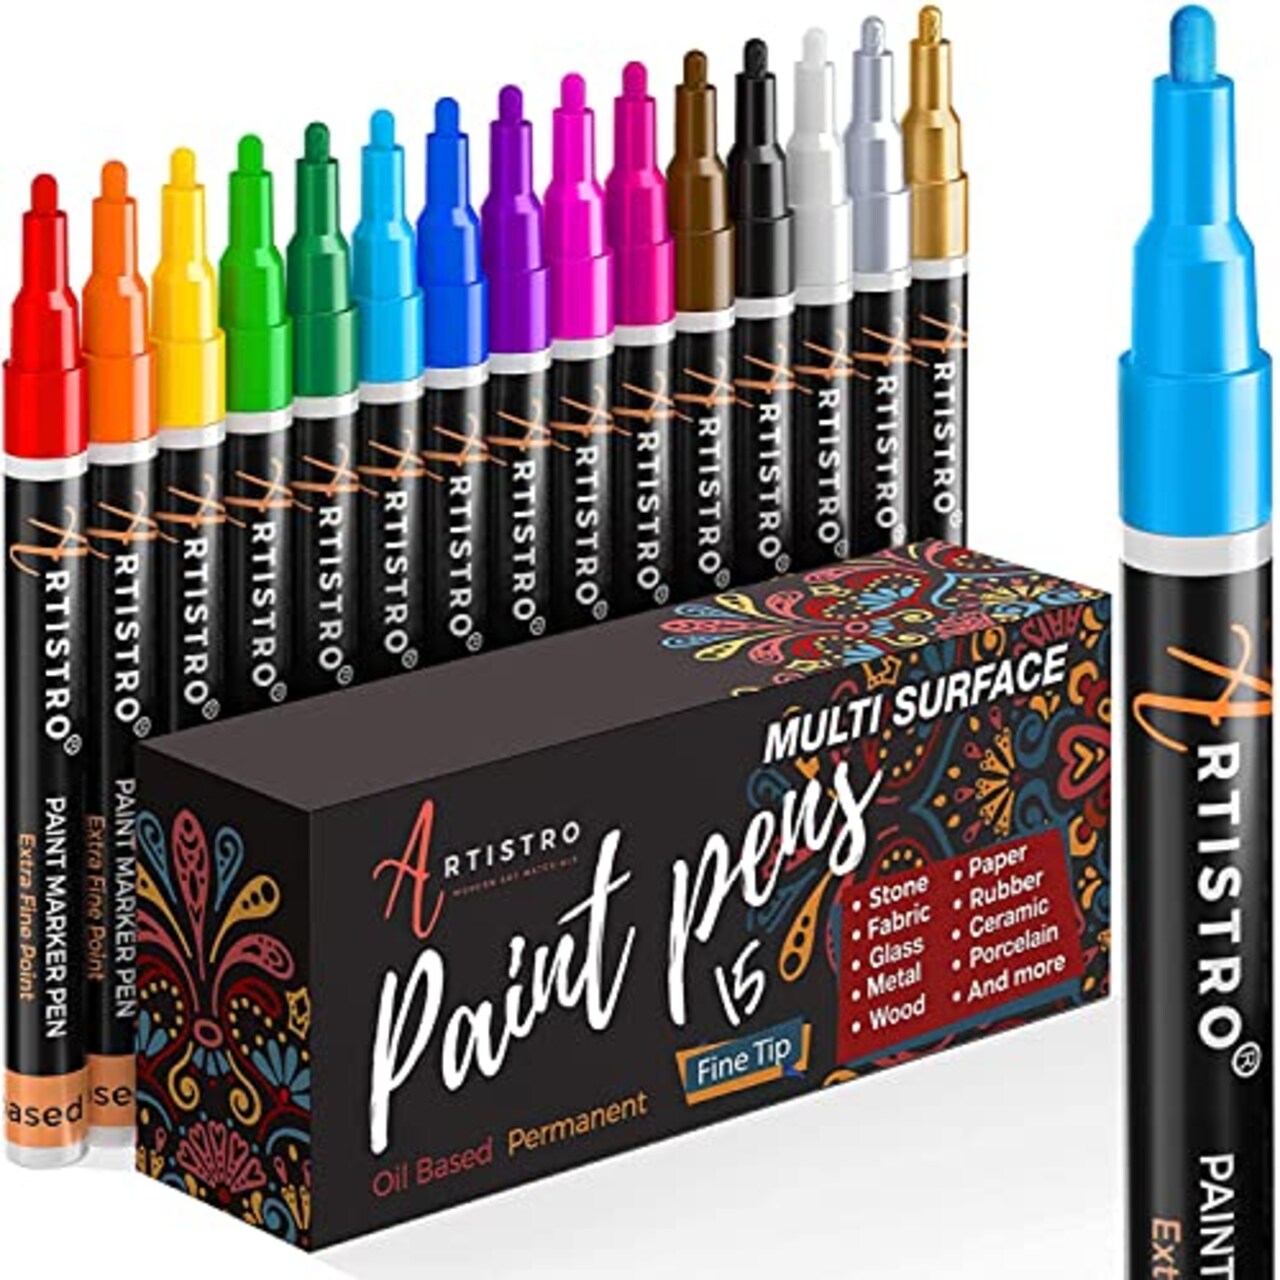 ARTISTRO 15 Oil Based Paint markers for Wood, Rock, Fabric, Glass -  Permanent, Quick Dry, Waterproof - Oil paint pens for Ceramic, Mugs, Metal,  Plastic - 1mm Fine Tip